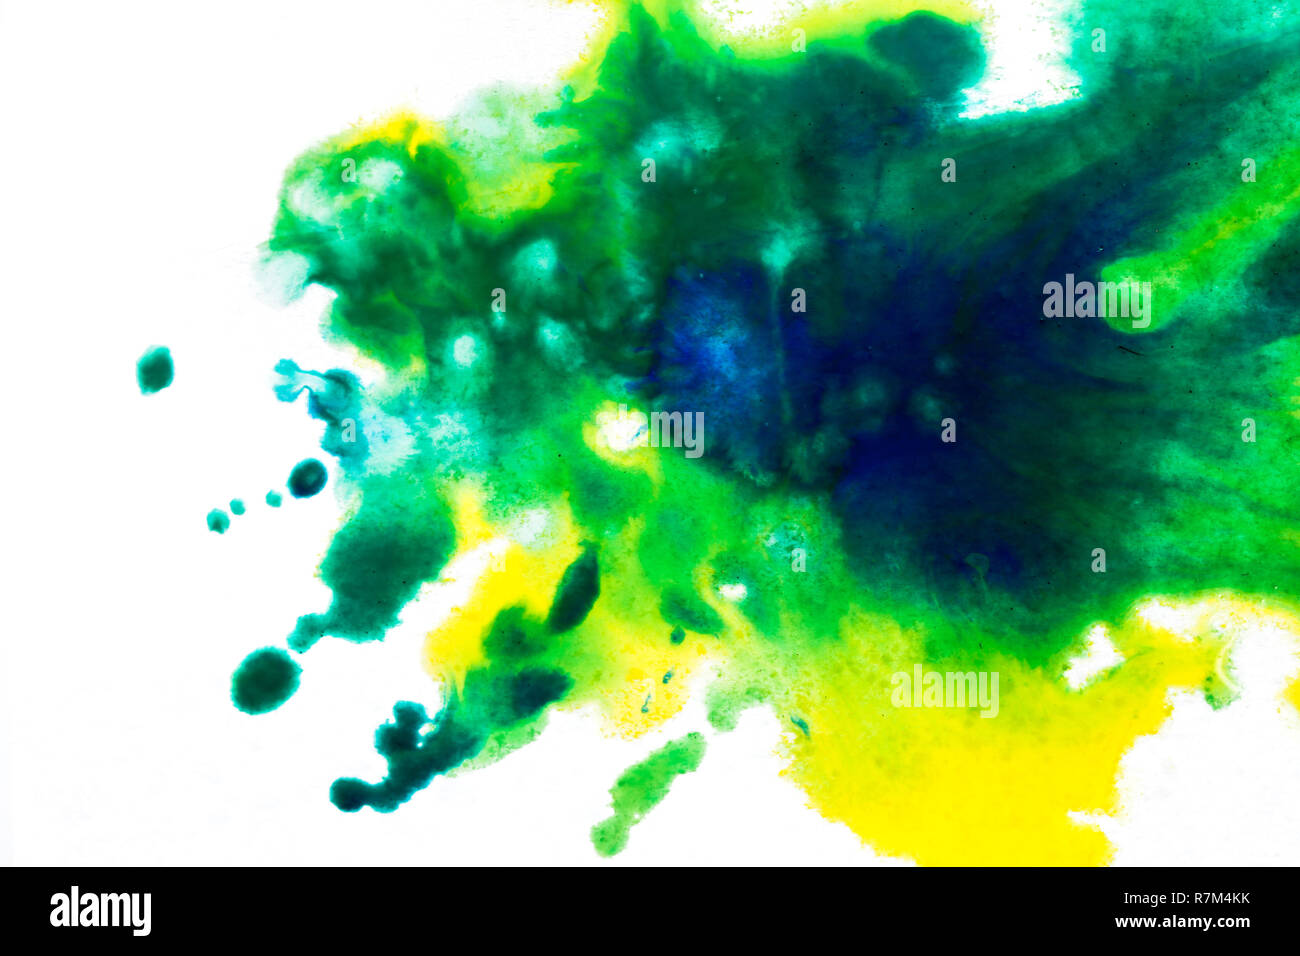 yellow green, blurry spot of watercolor paint. background Stock Photo